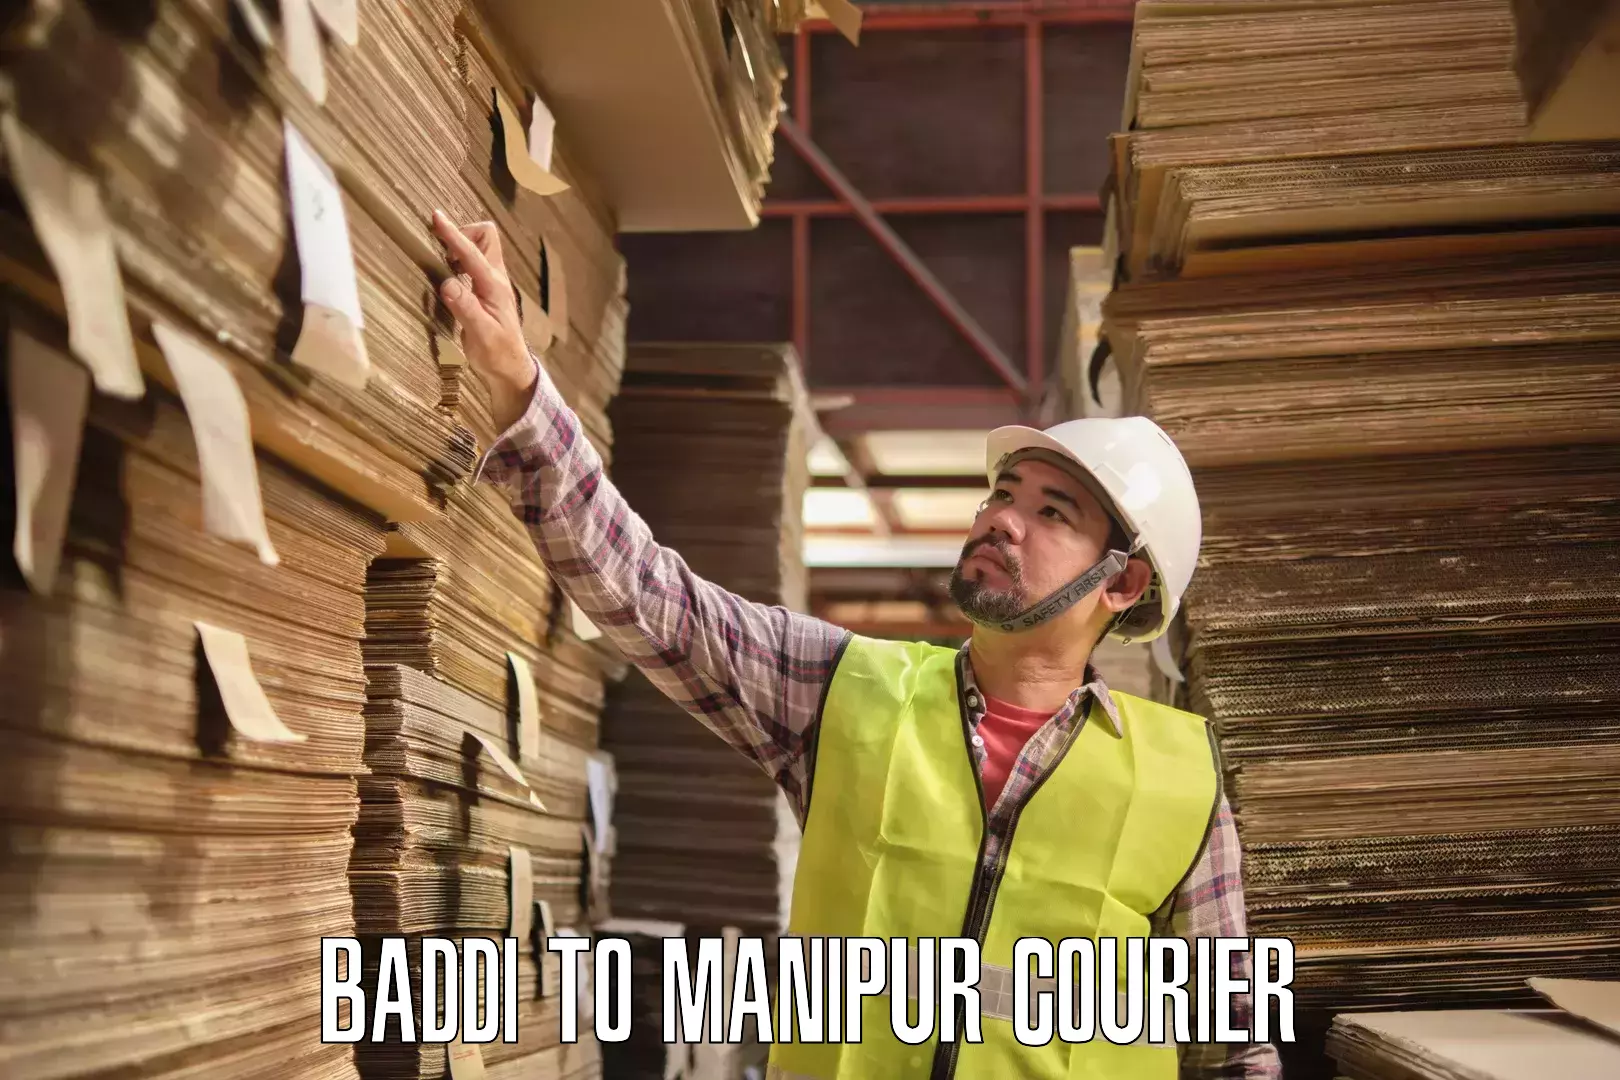 Nationwide courier service Baddi to Chandel